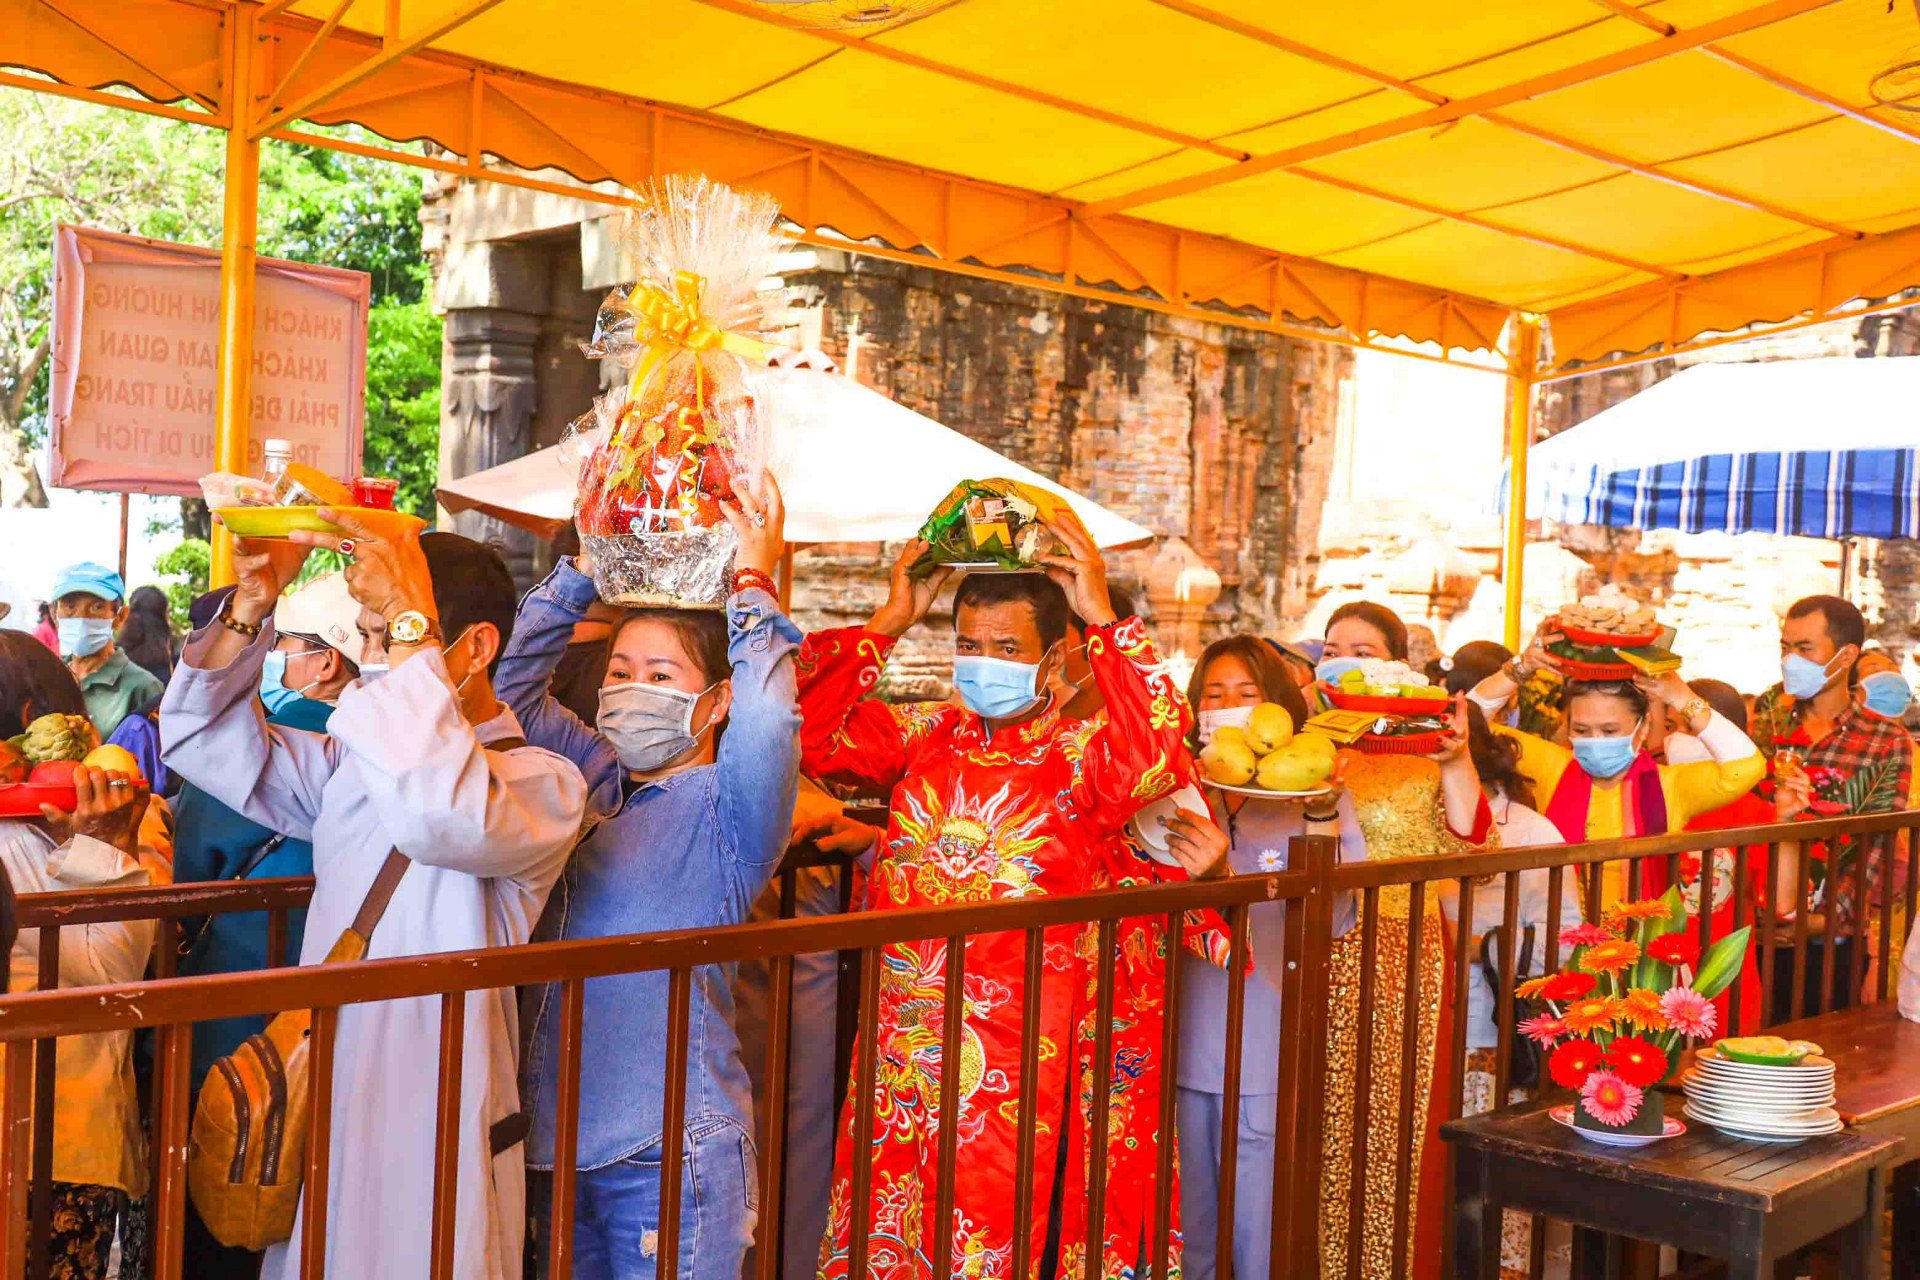 Pilgrims waiting to enter temples to offer offerings to the Holy Mother